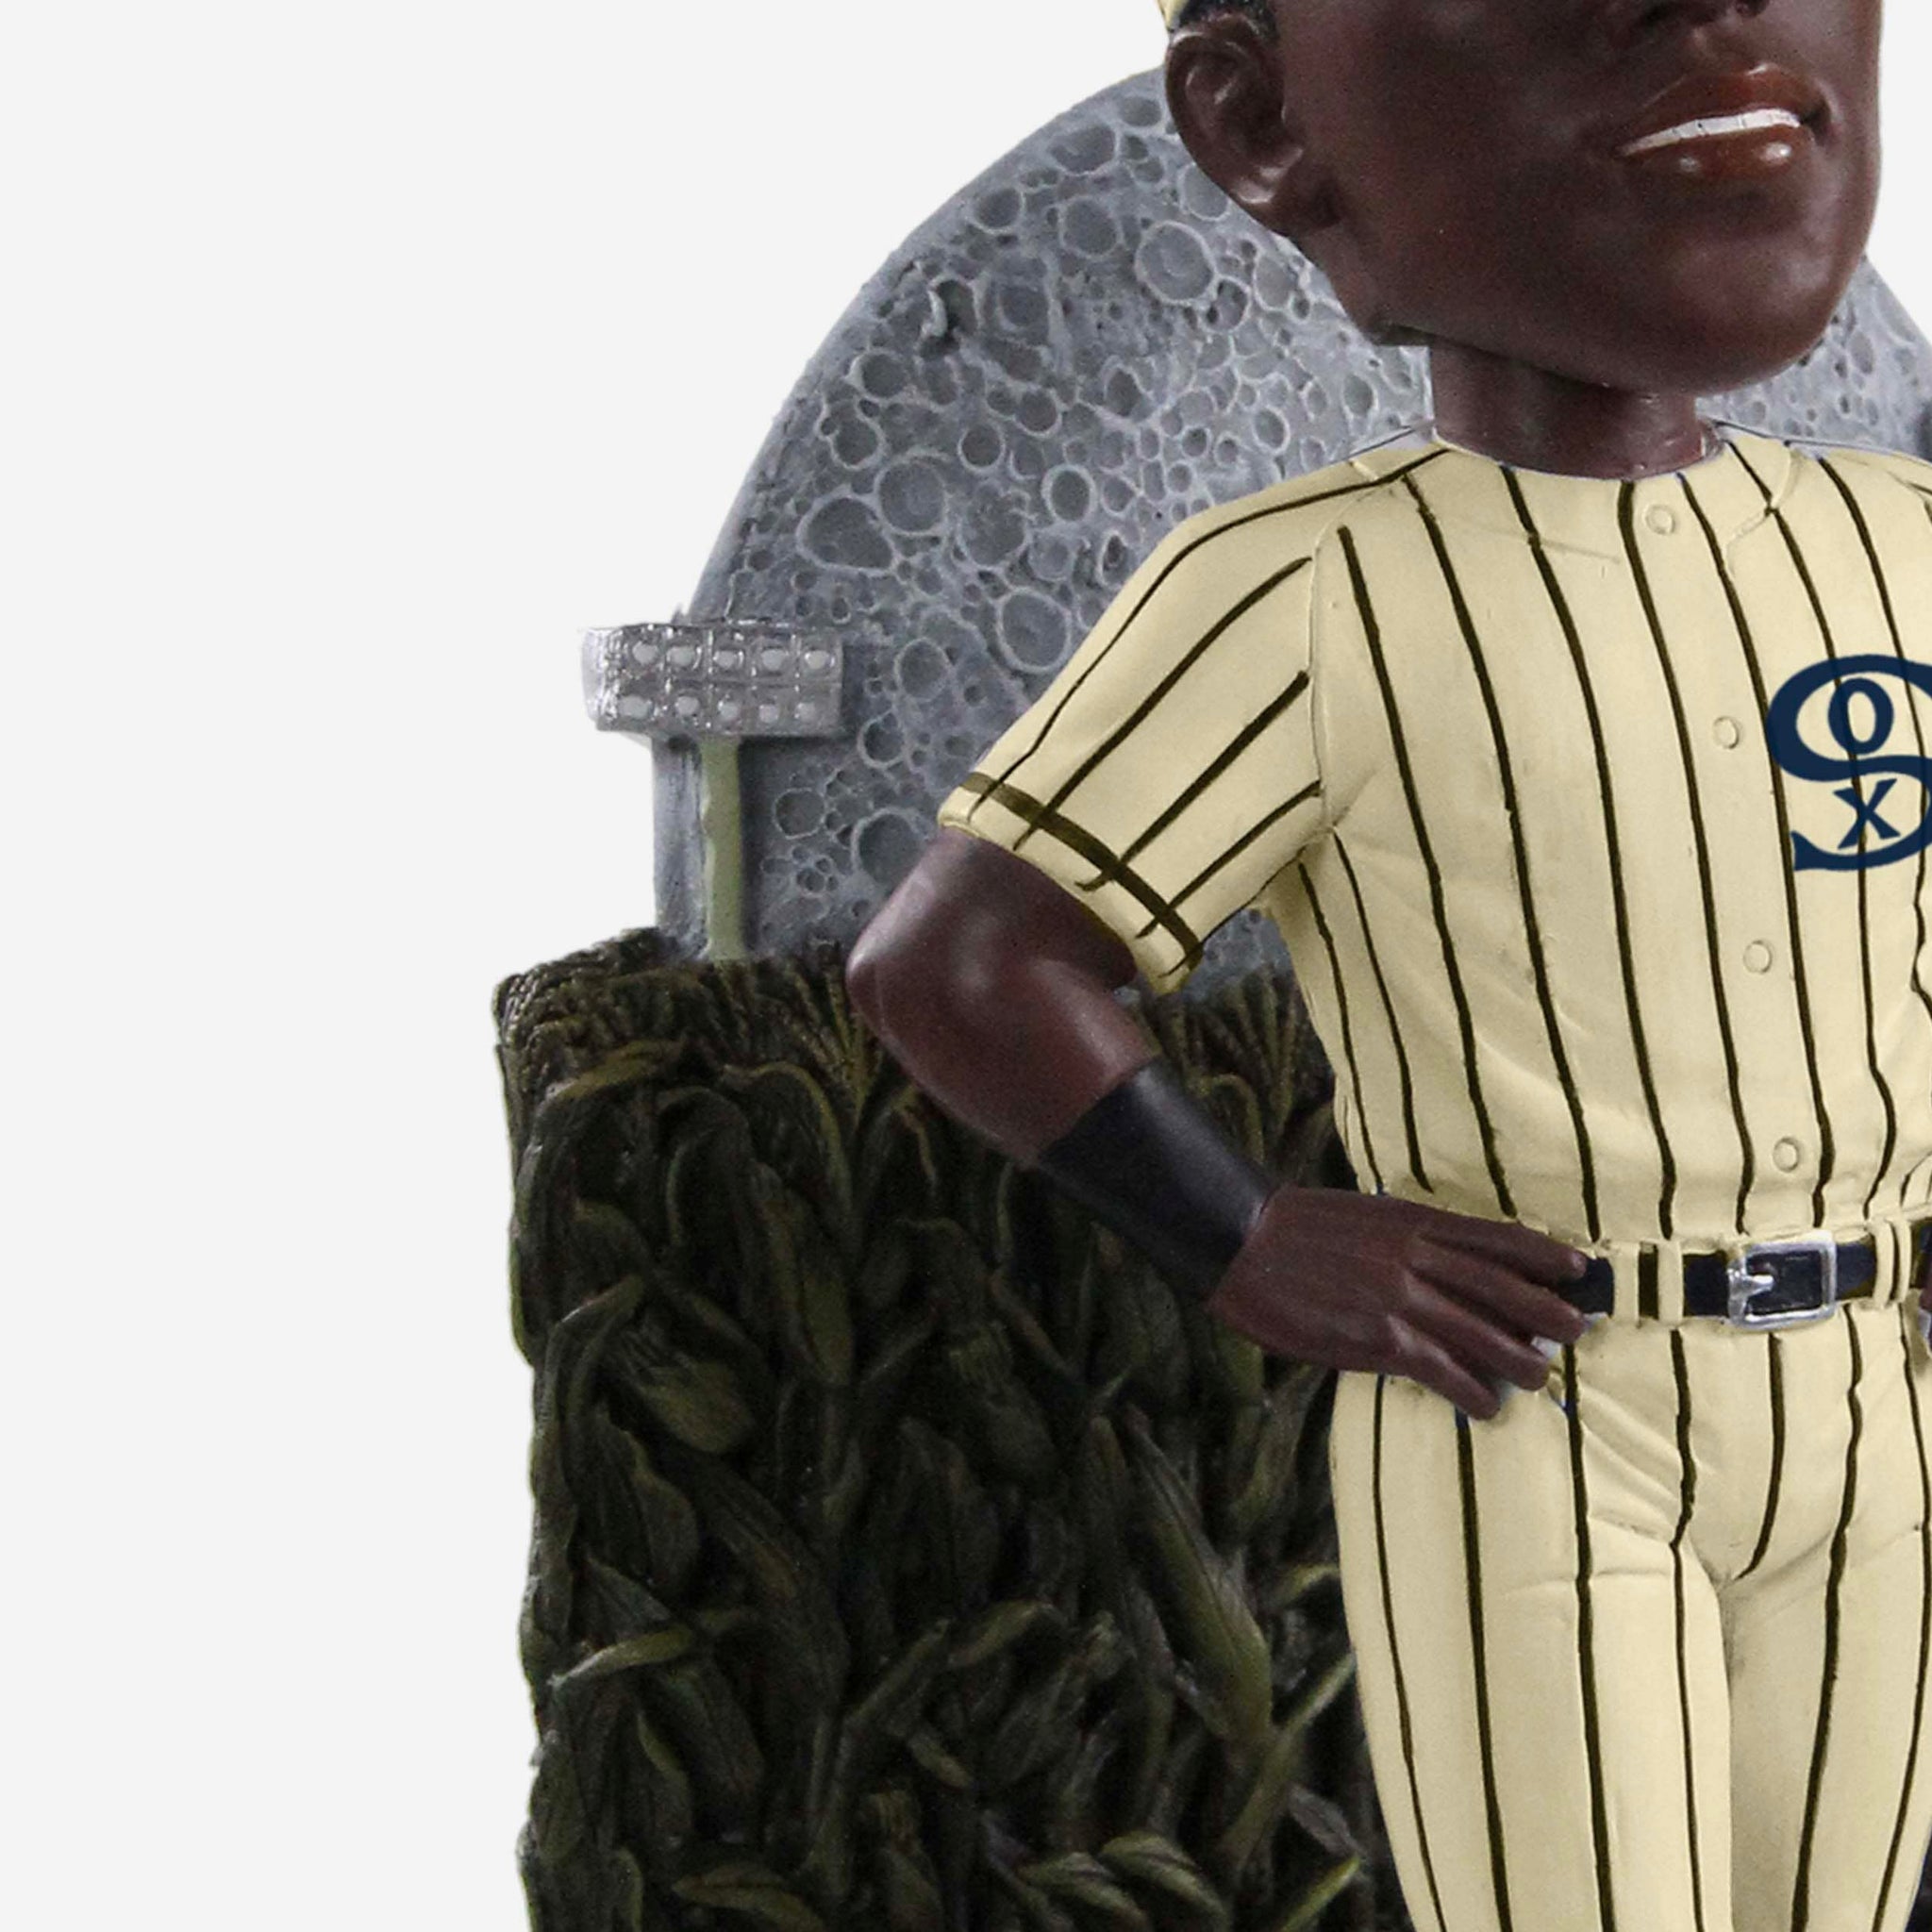 Field of Dreams Bobbleheads now available